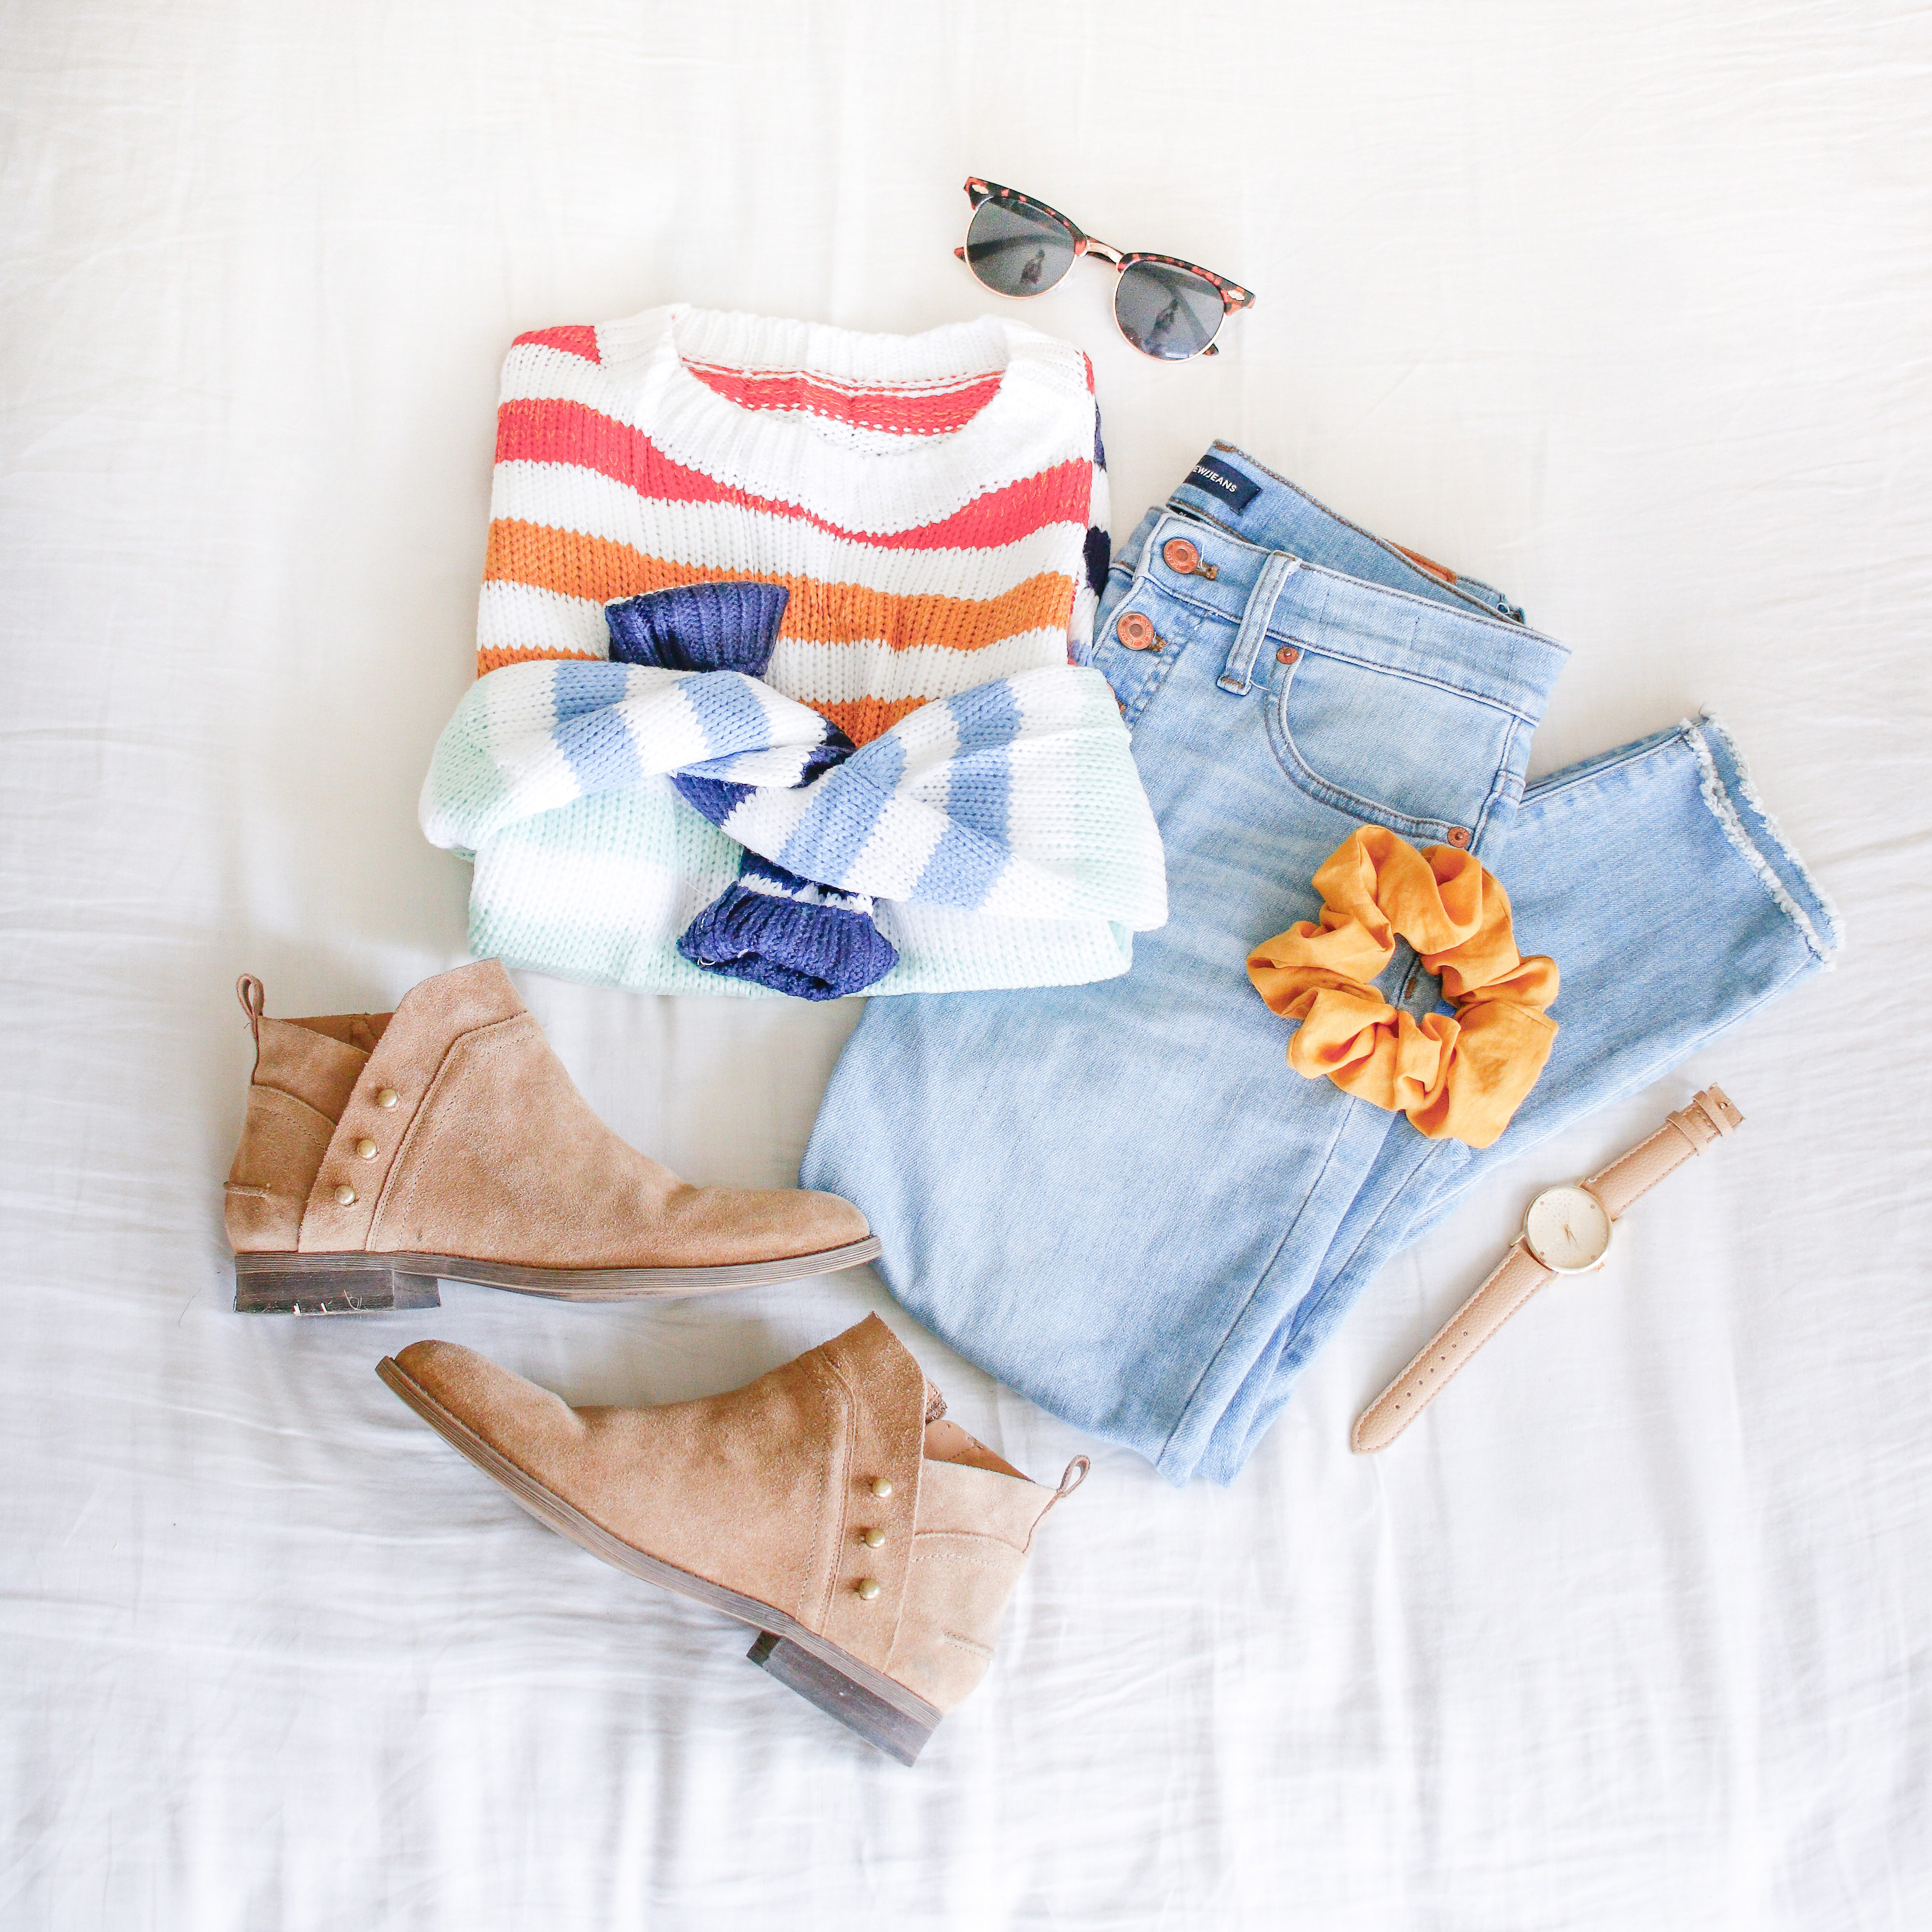 10 of the Cutest Fall Sweaters! - mikyla